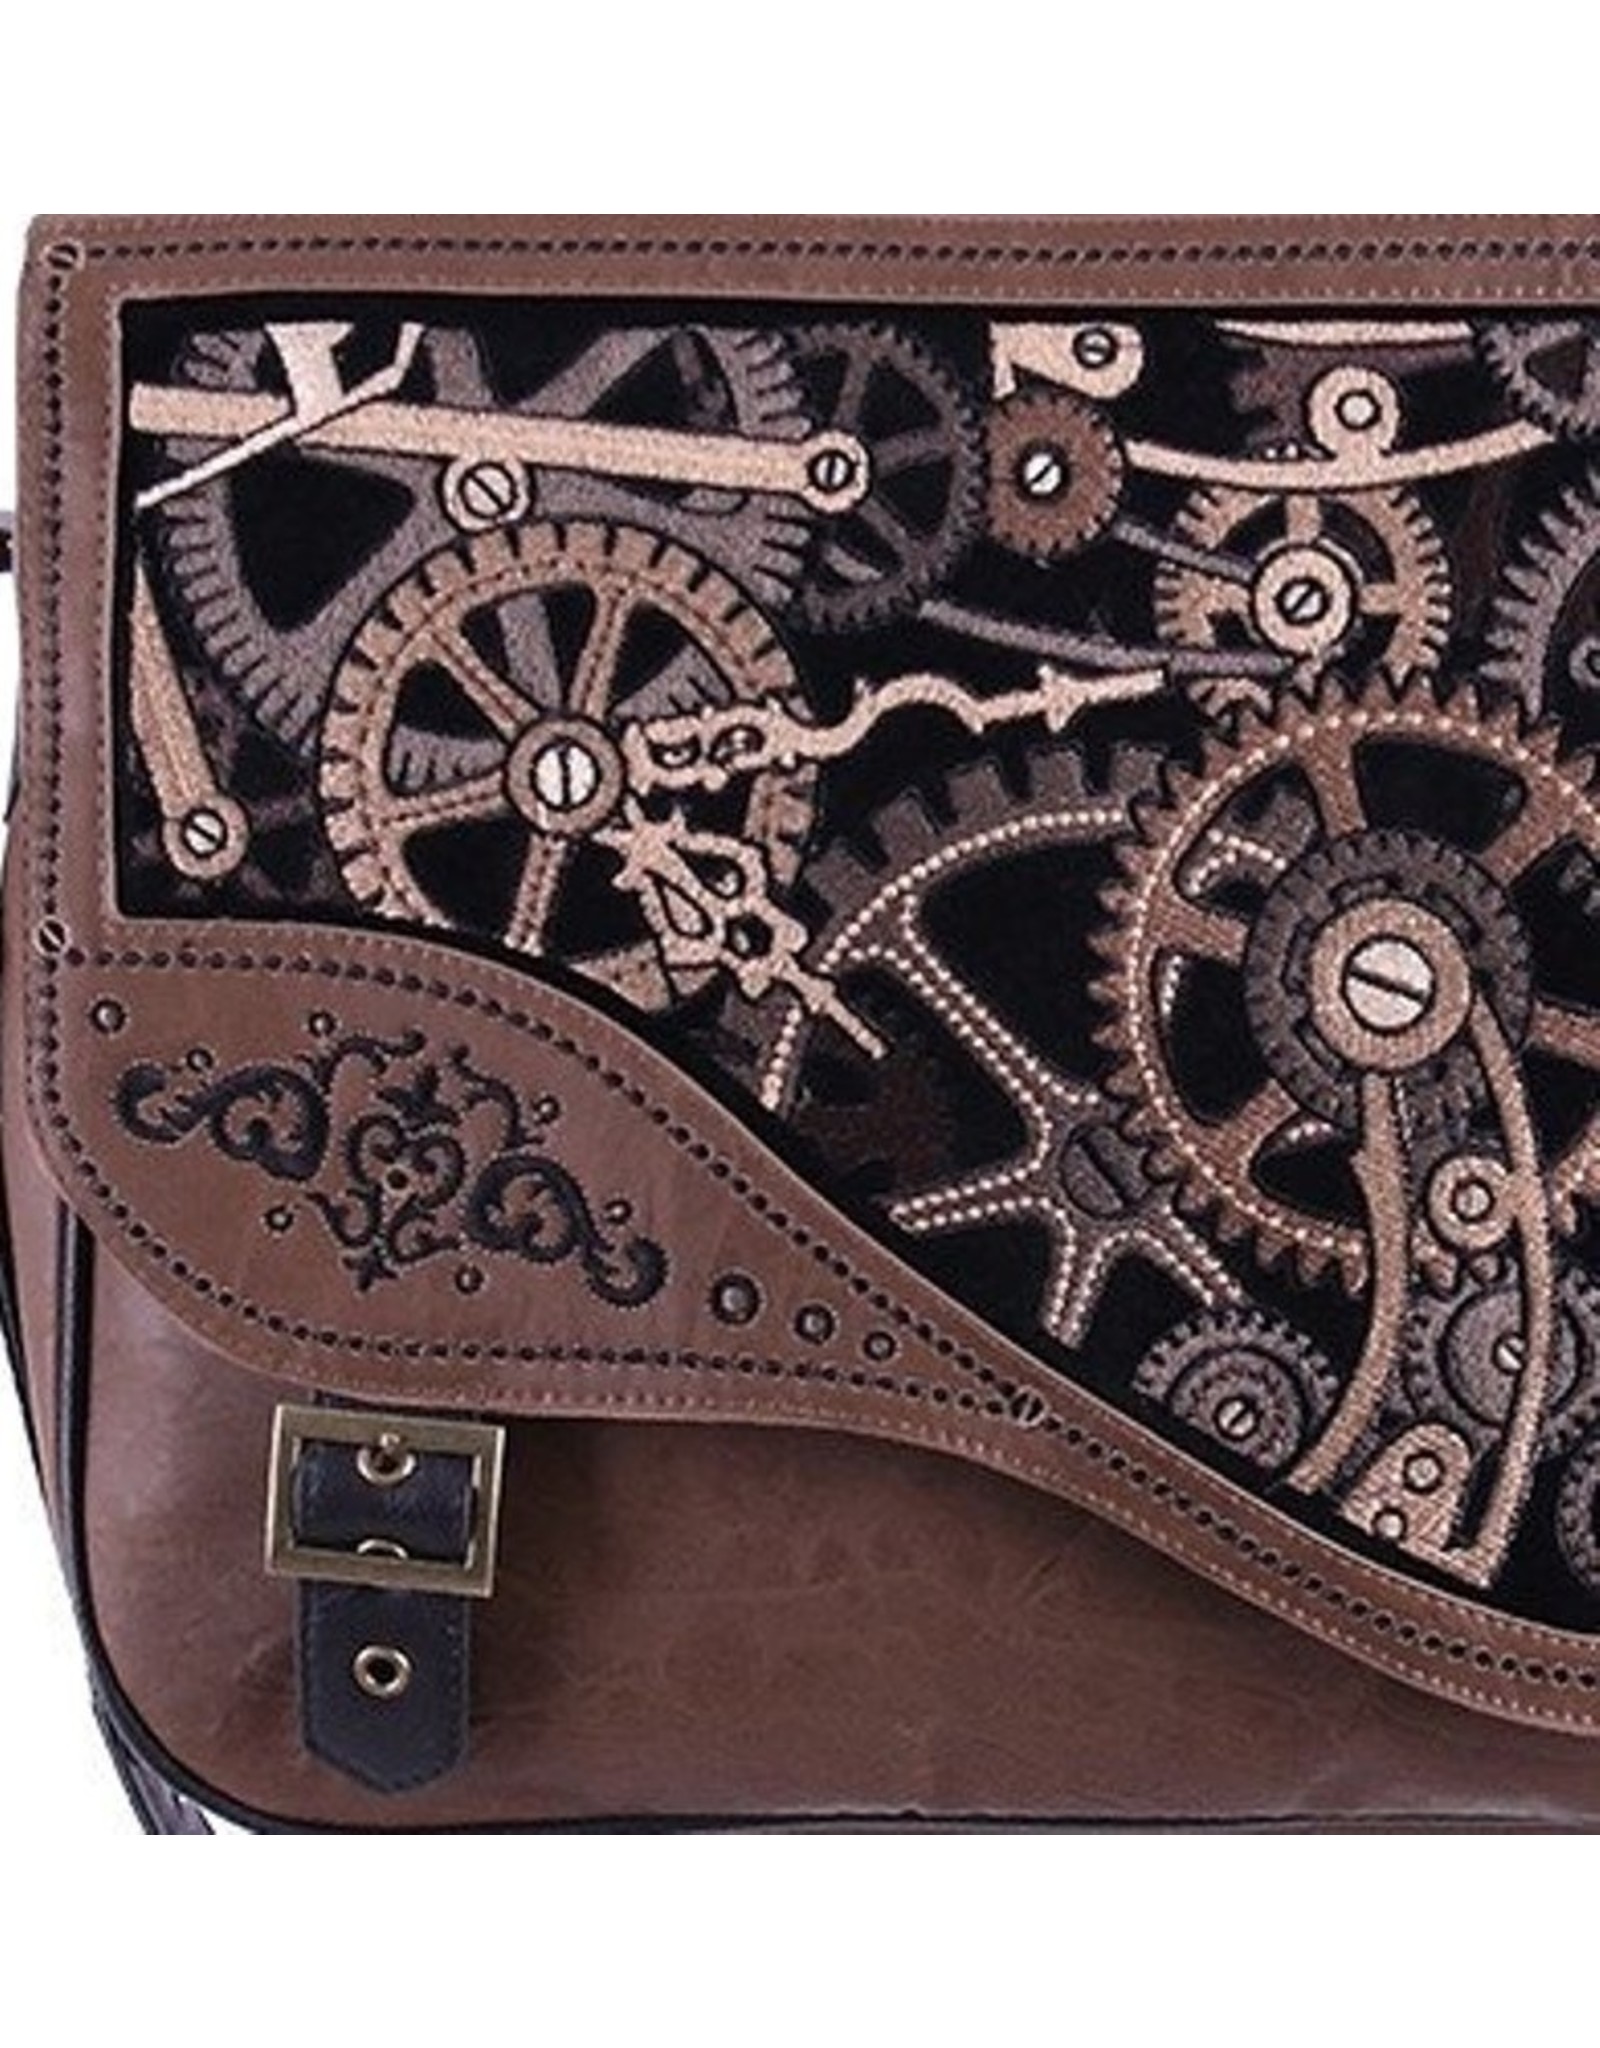 Restyle Gothic bags Steampunk bags - Restyle Steampunk satchel bag Brown Mechanism